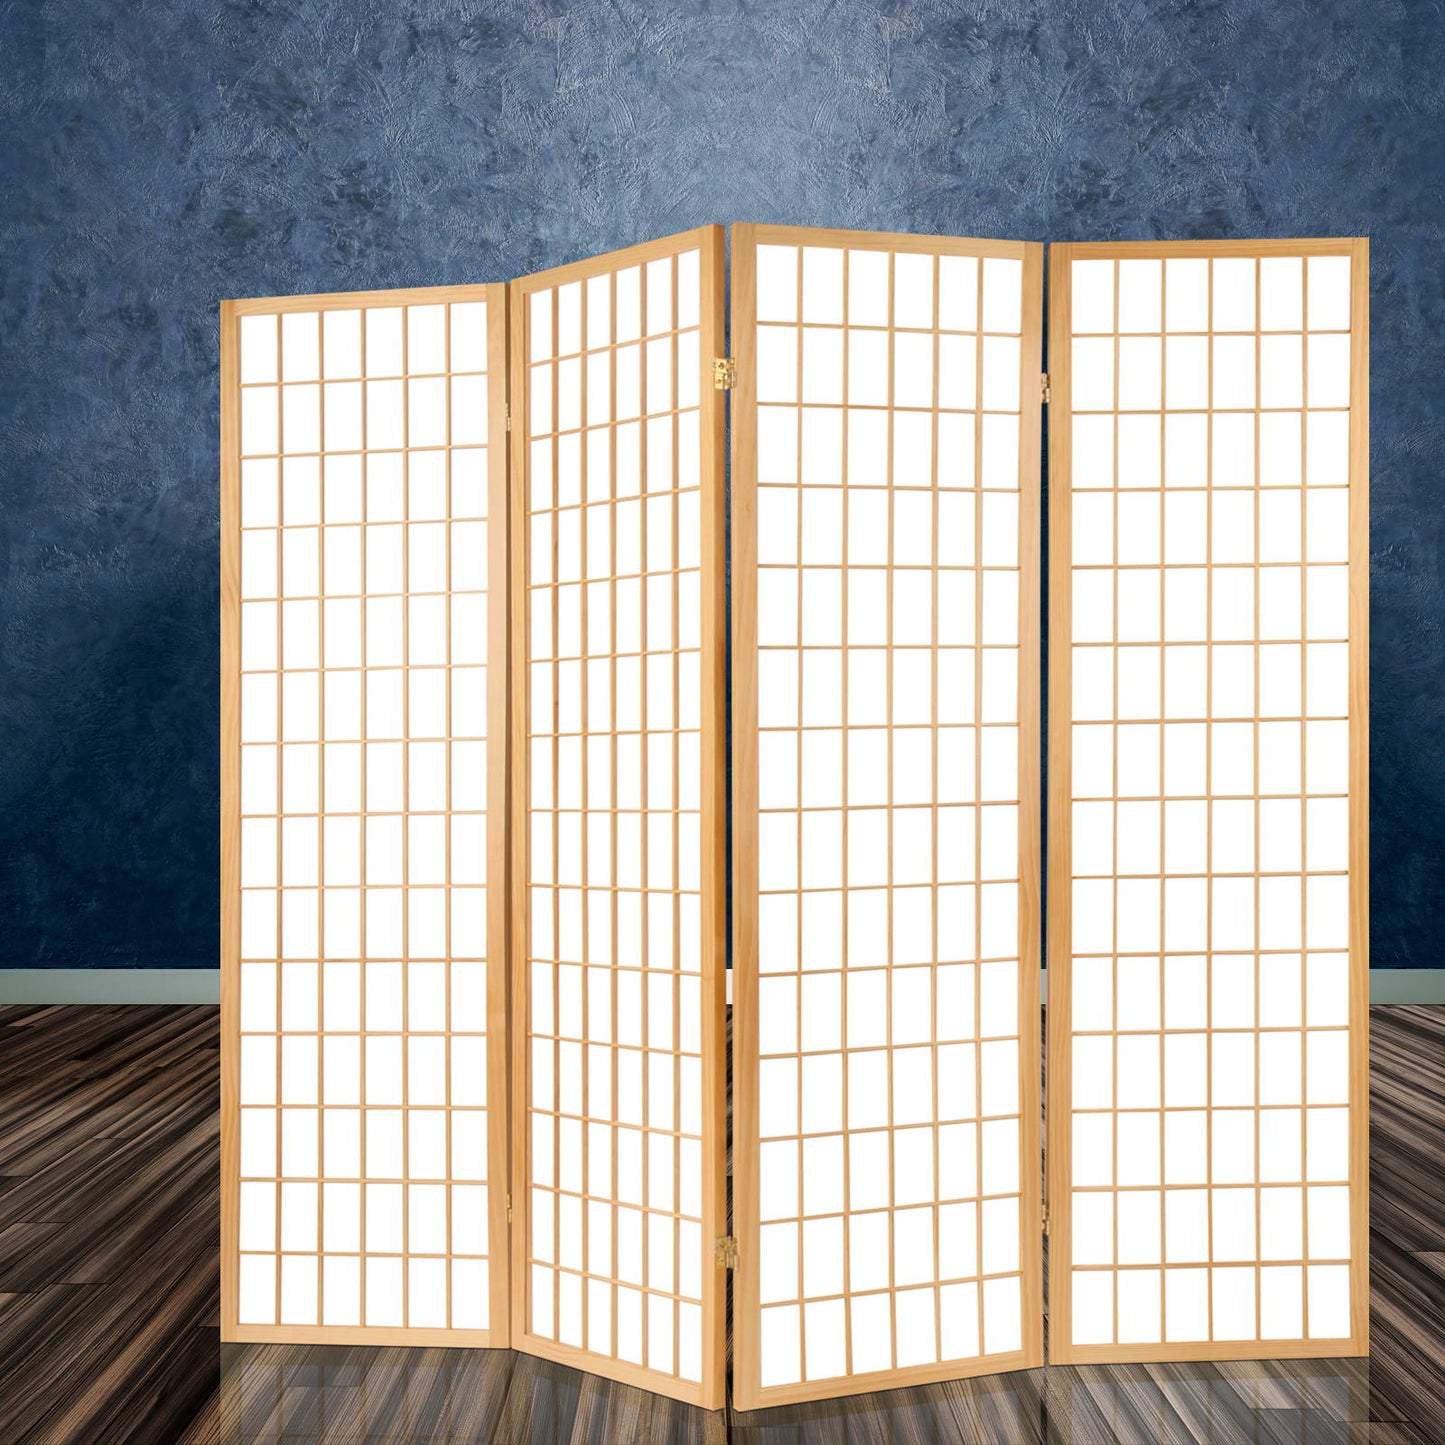 6 Panel Room Divider Privacy Screen Foldable Pine Wood Stand Natural - image7